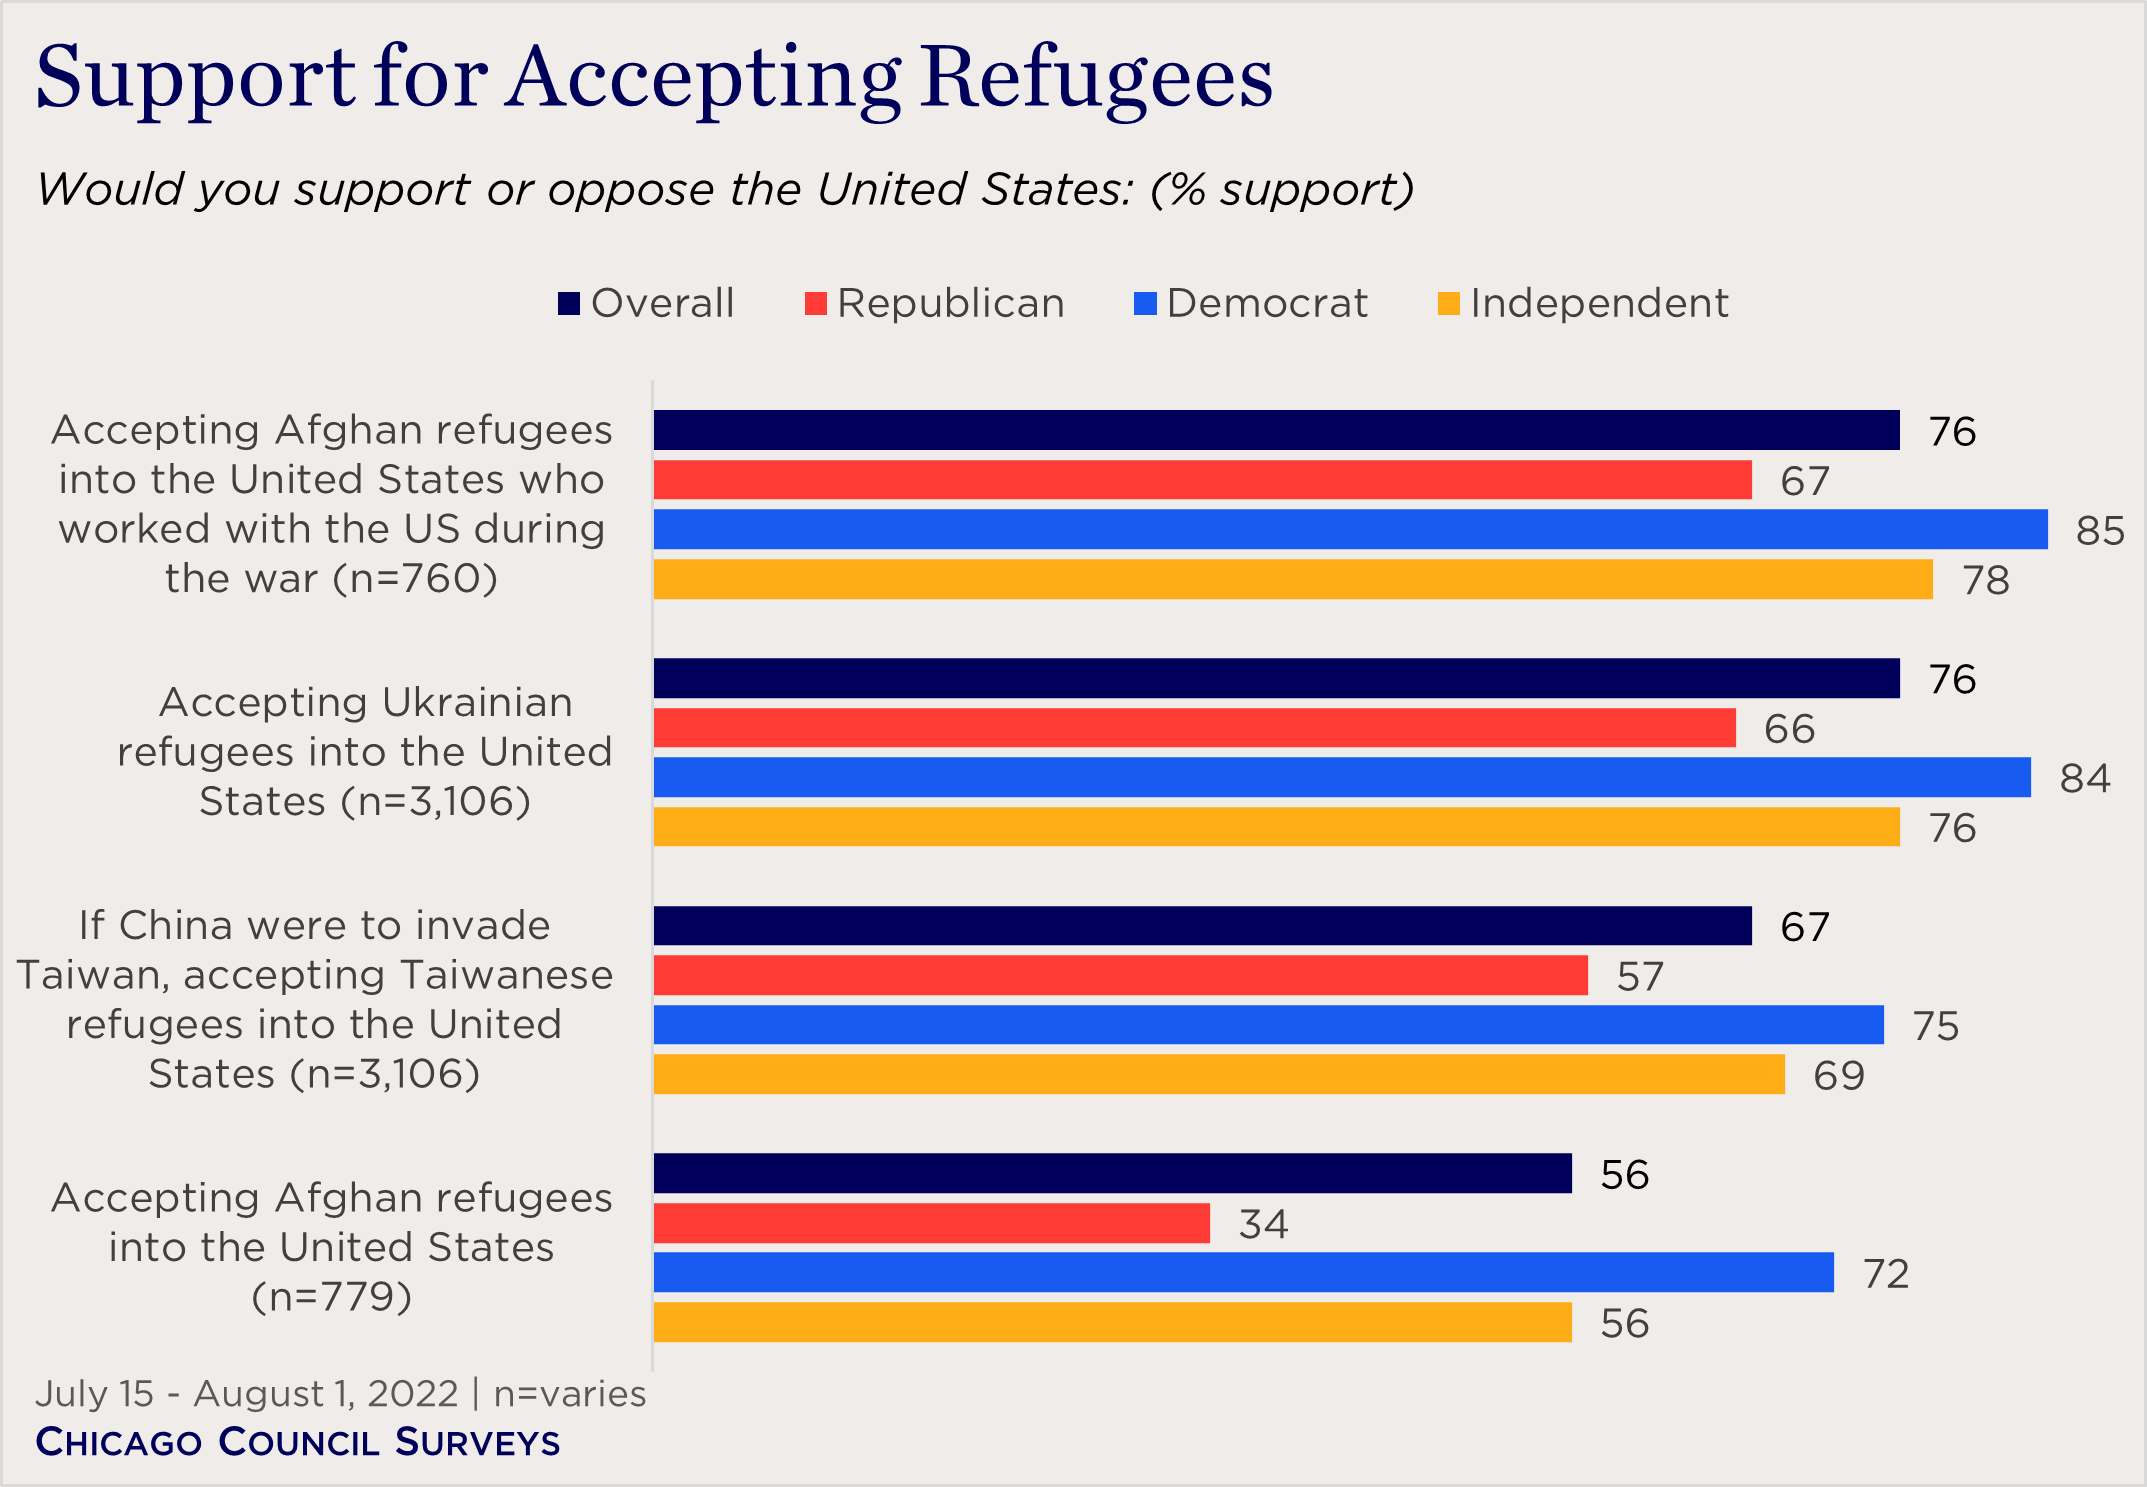 "bar chart showing partisan support for accepting refugees"